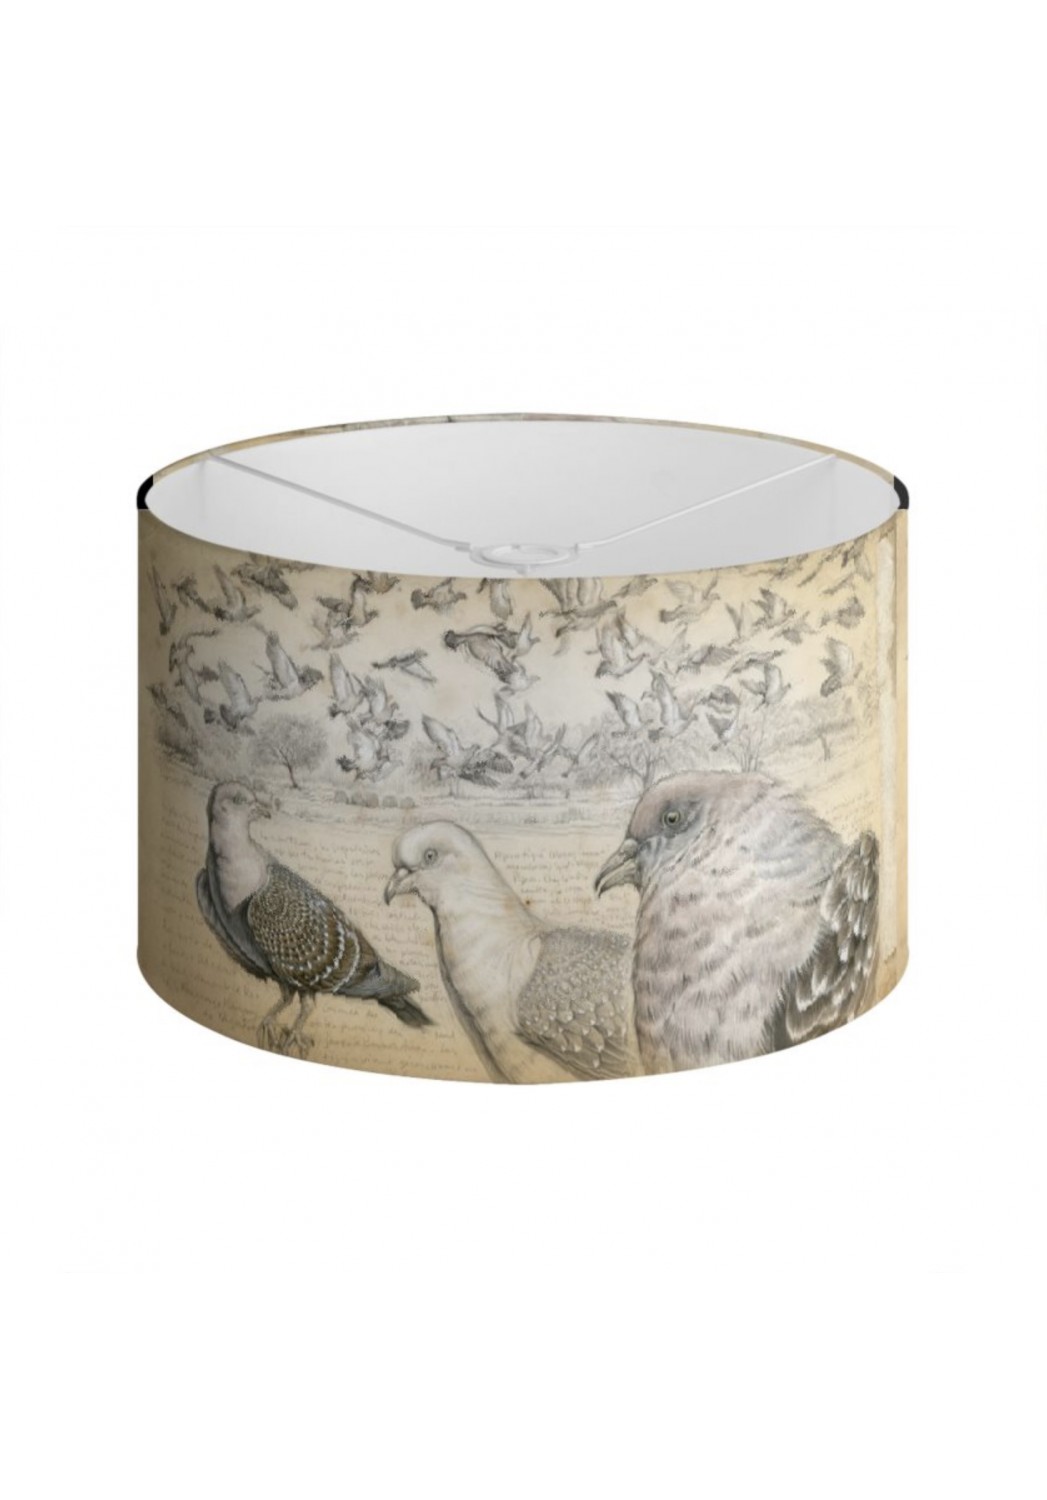 Marcello-art: Decoration accessoiries Lampshade 232 Spot-winged Pigeon